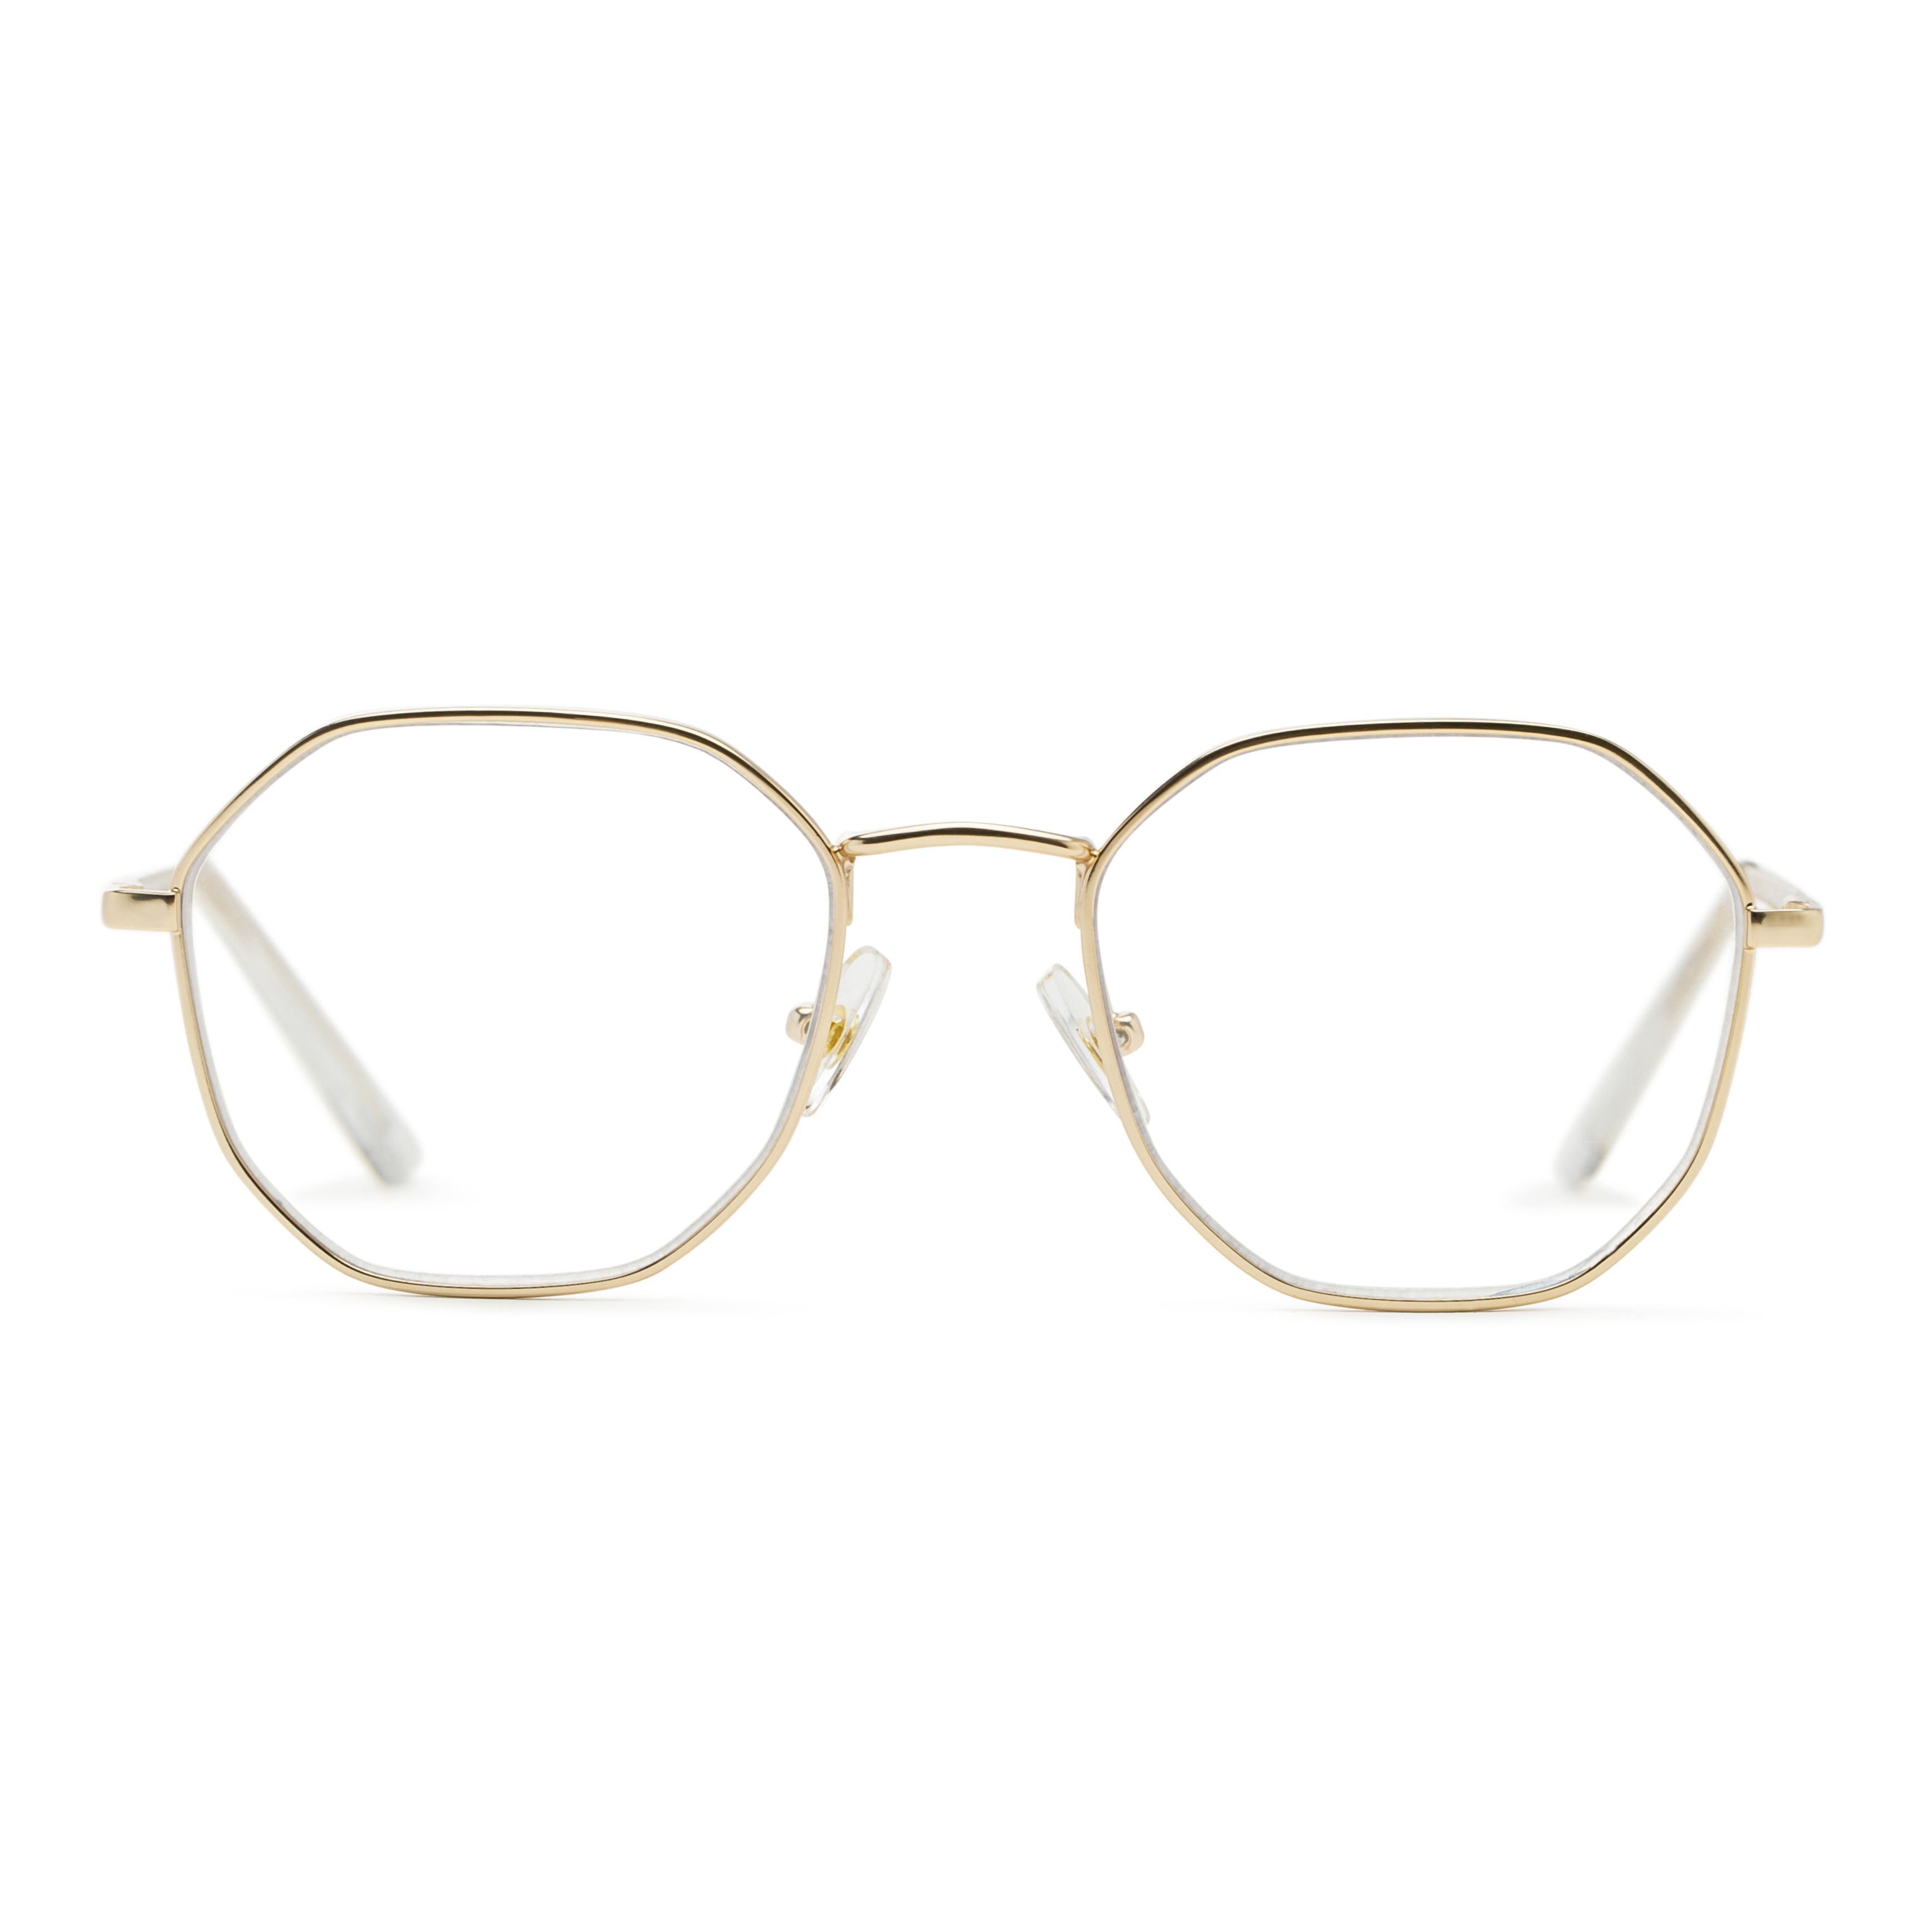 Women's Geometric Reading Glasses In Gold By Foster Grant - Cerritos - +1.50